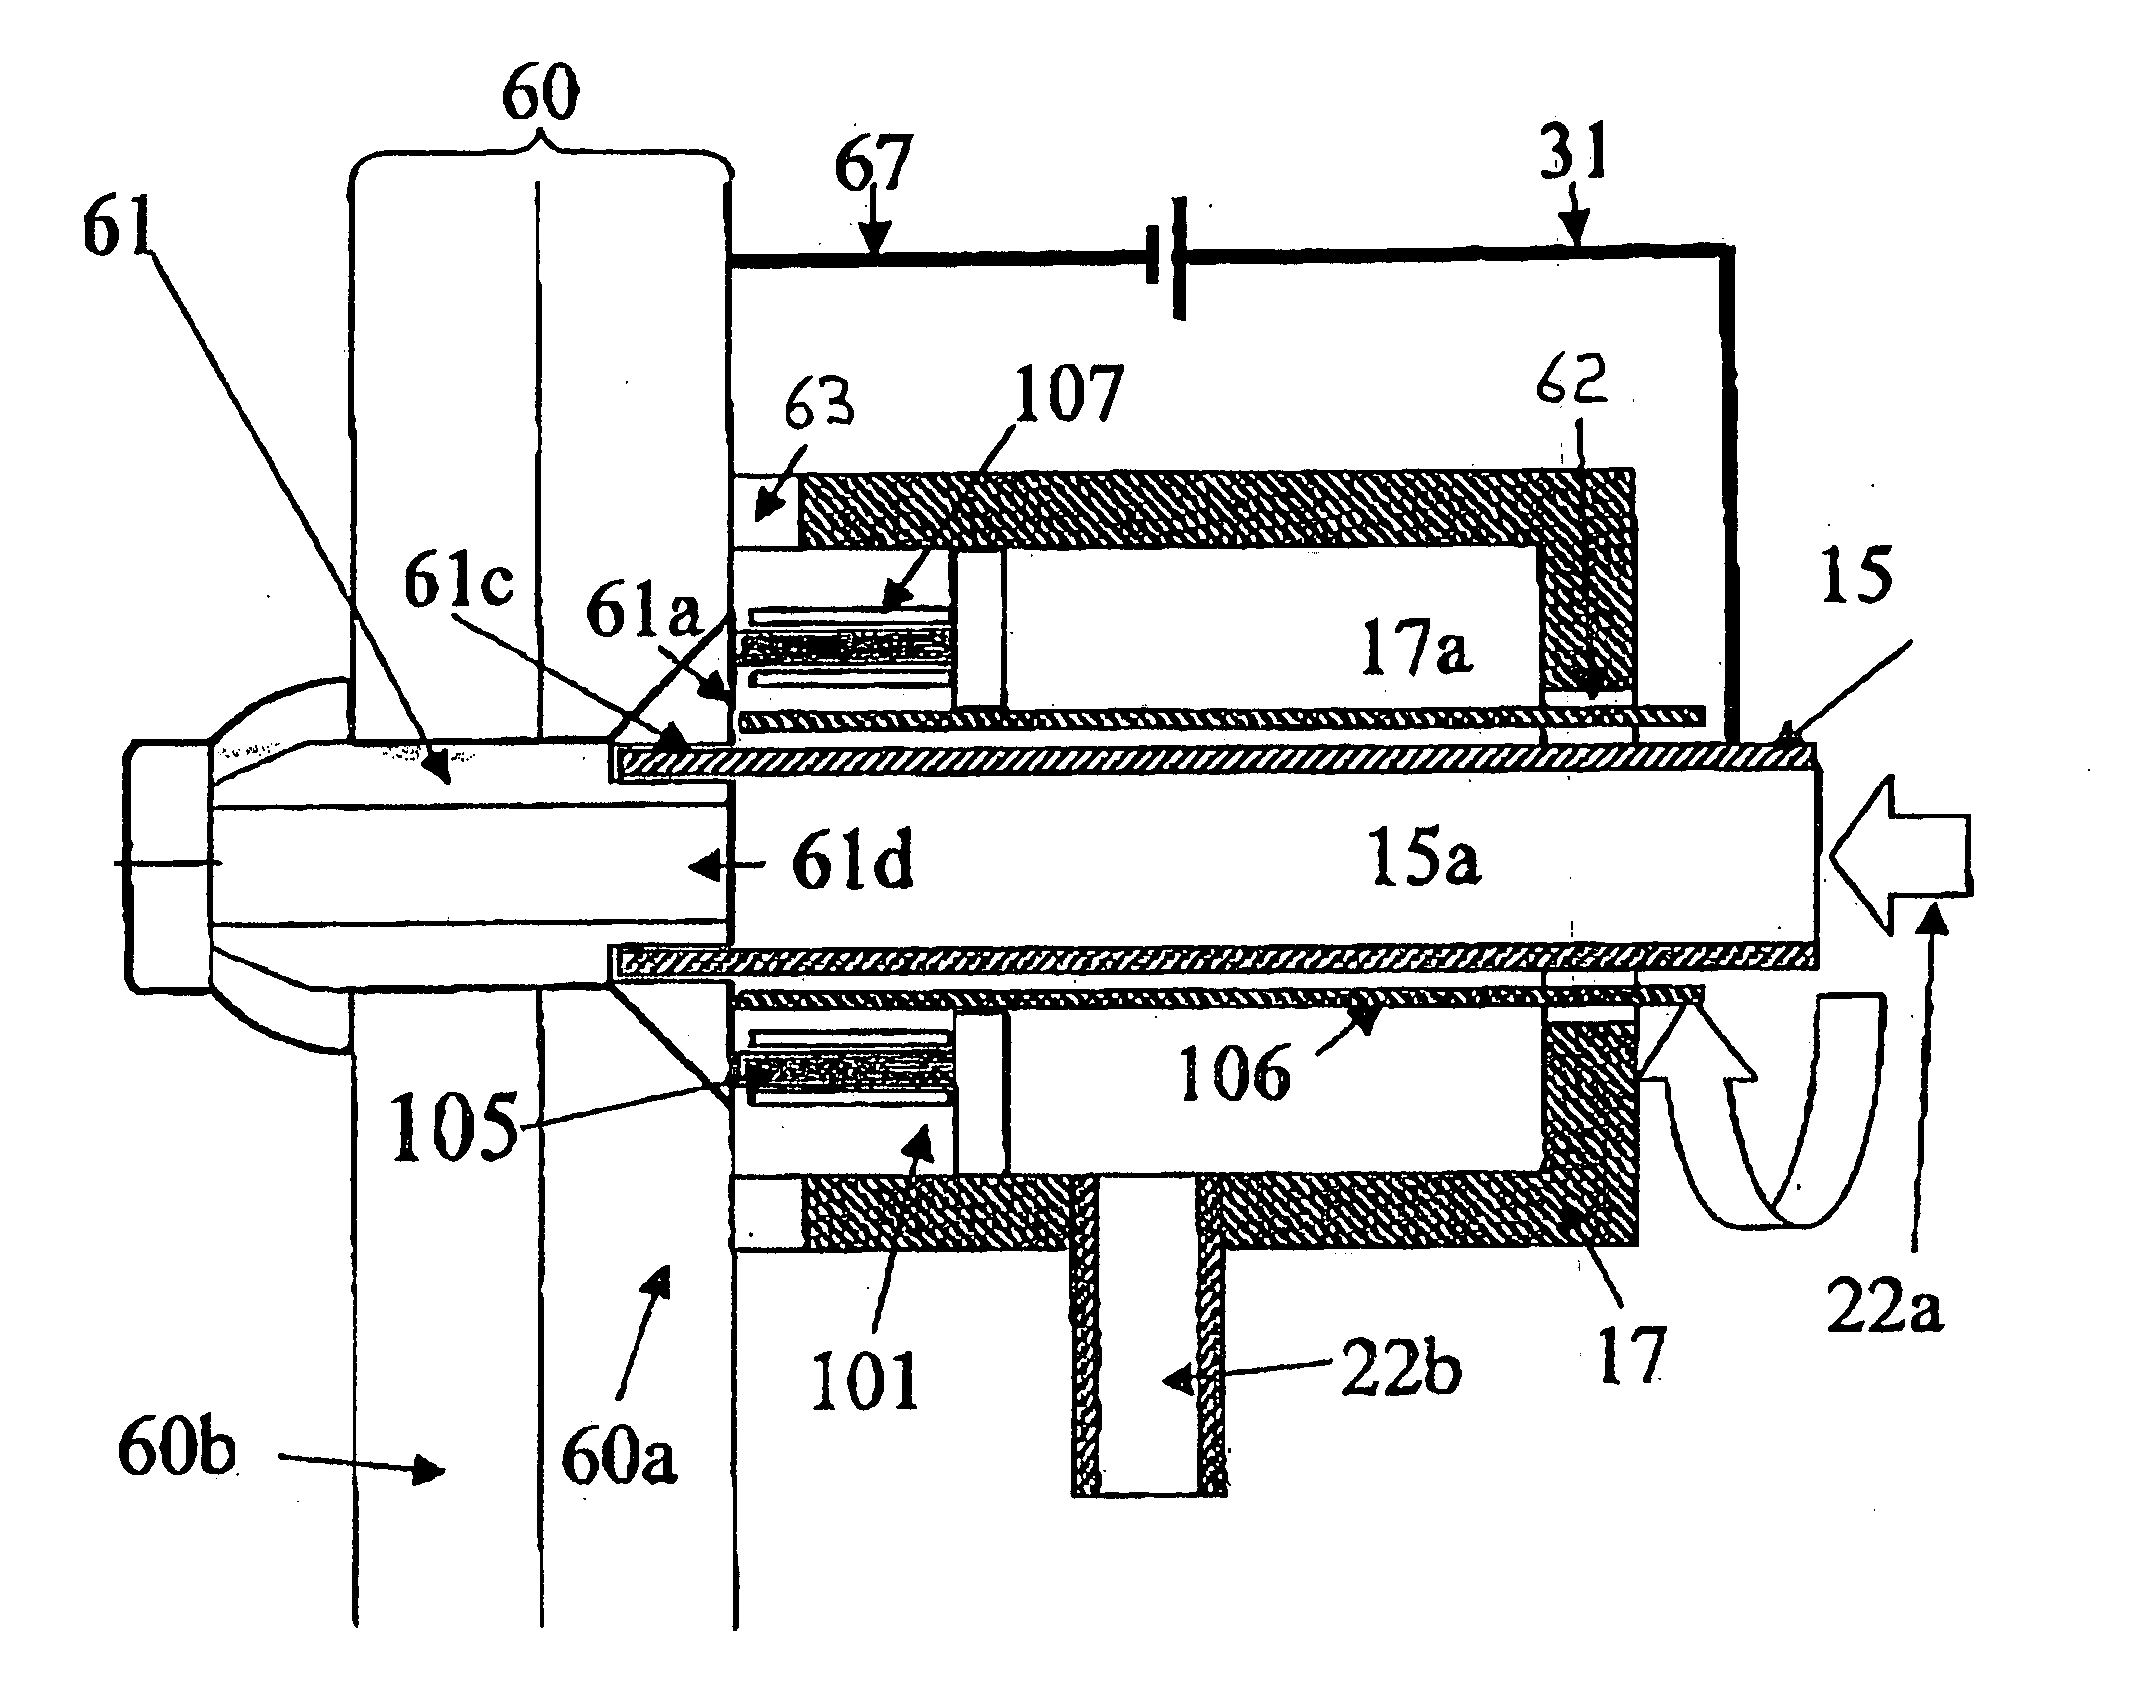 Erosion apparatus for the shaping machining of a metallic structural component or a metallic insert element in a structural component as well as an erosion method